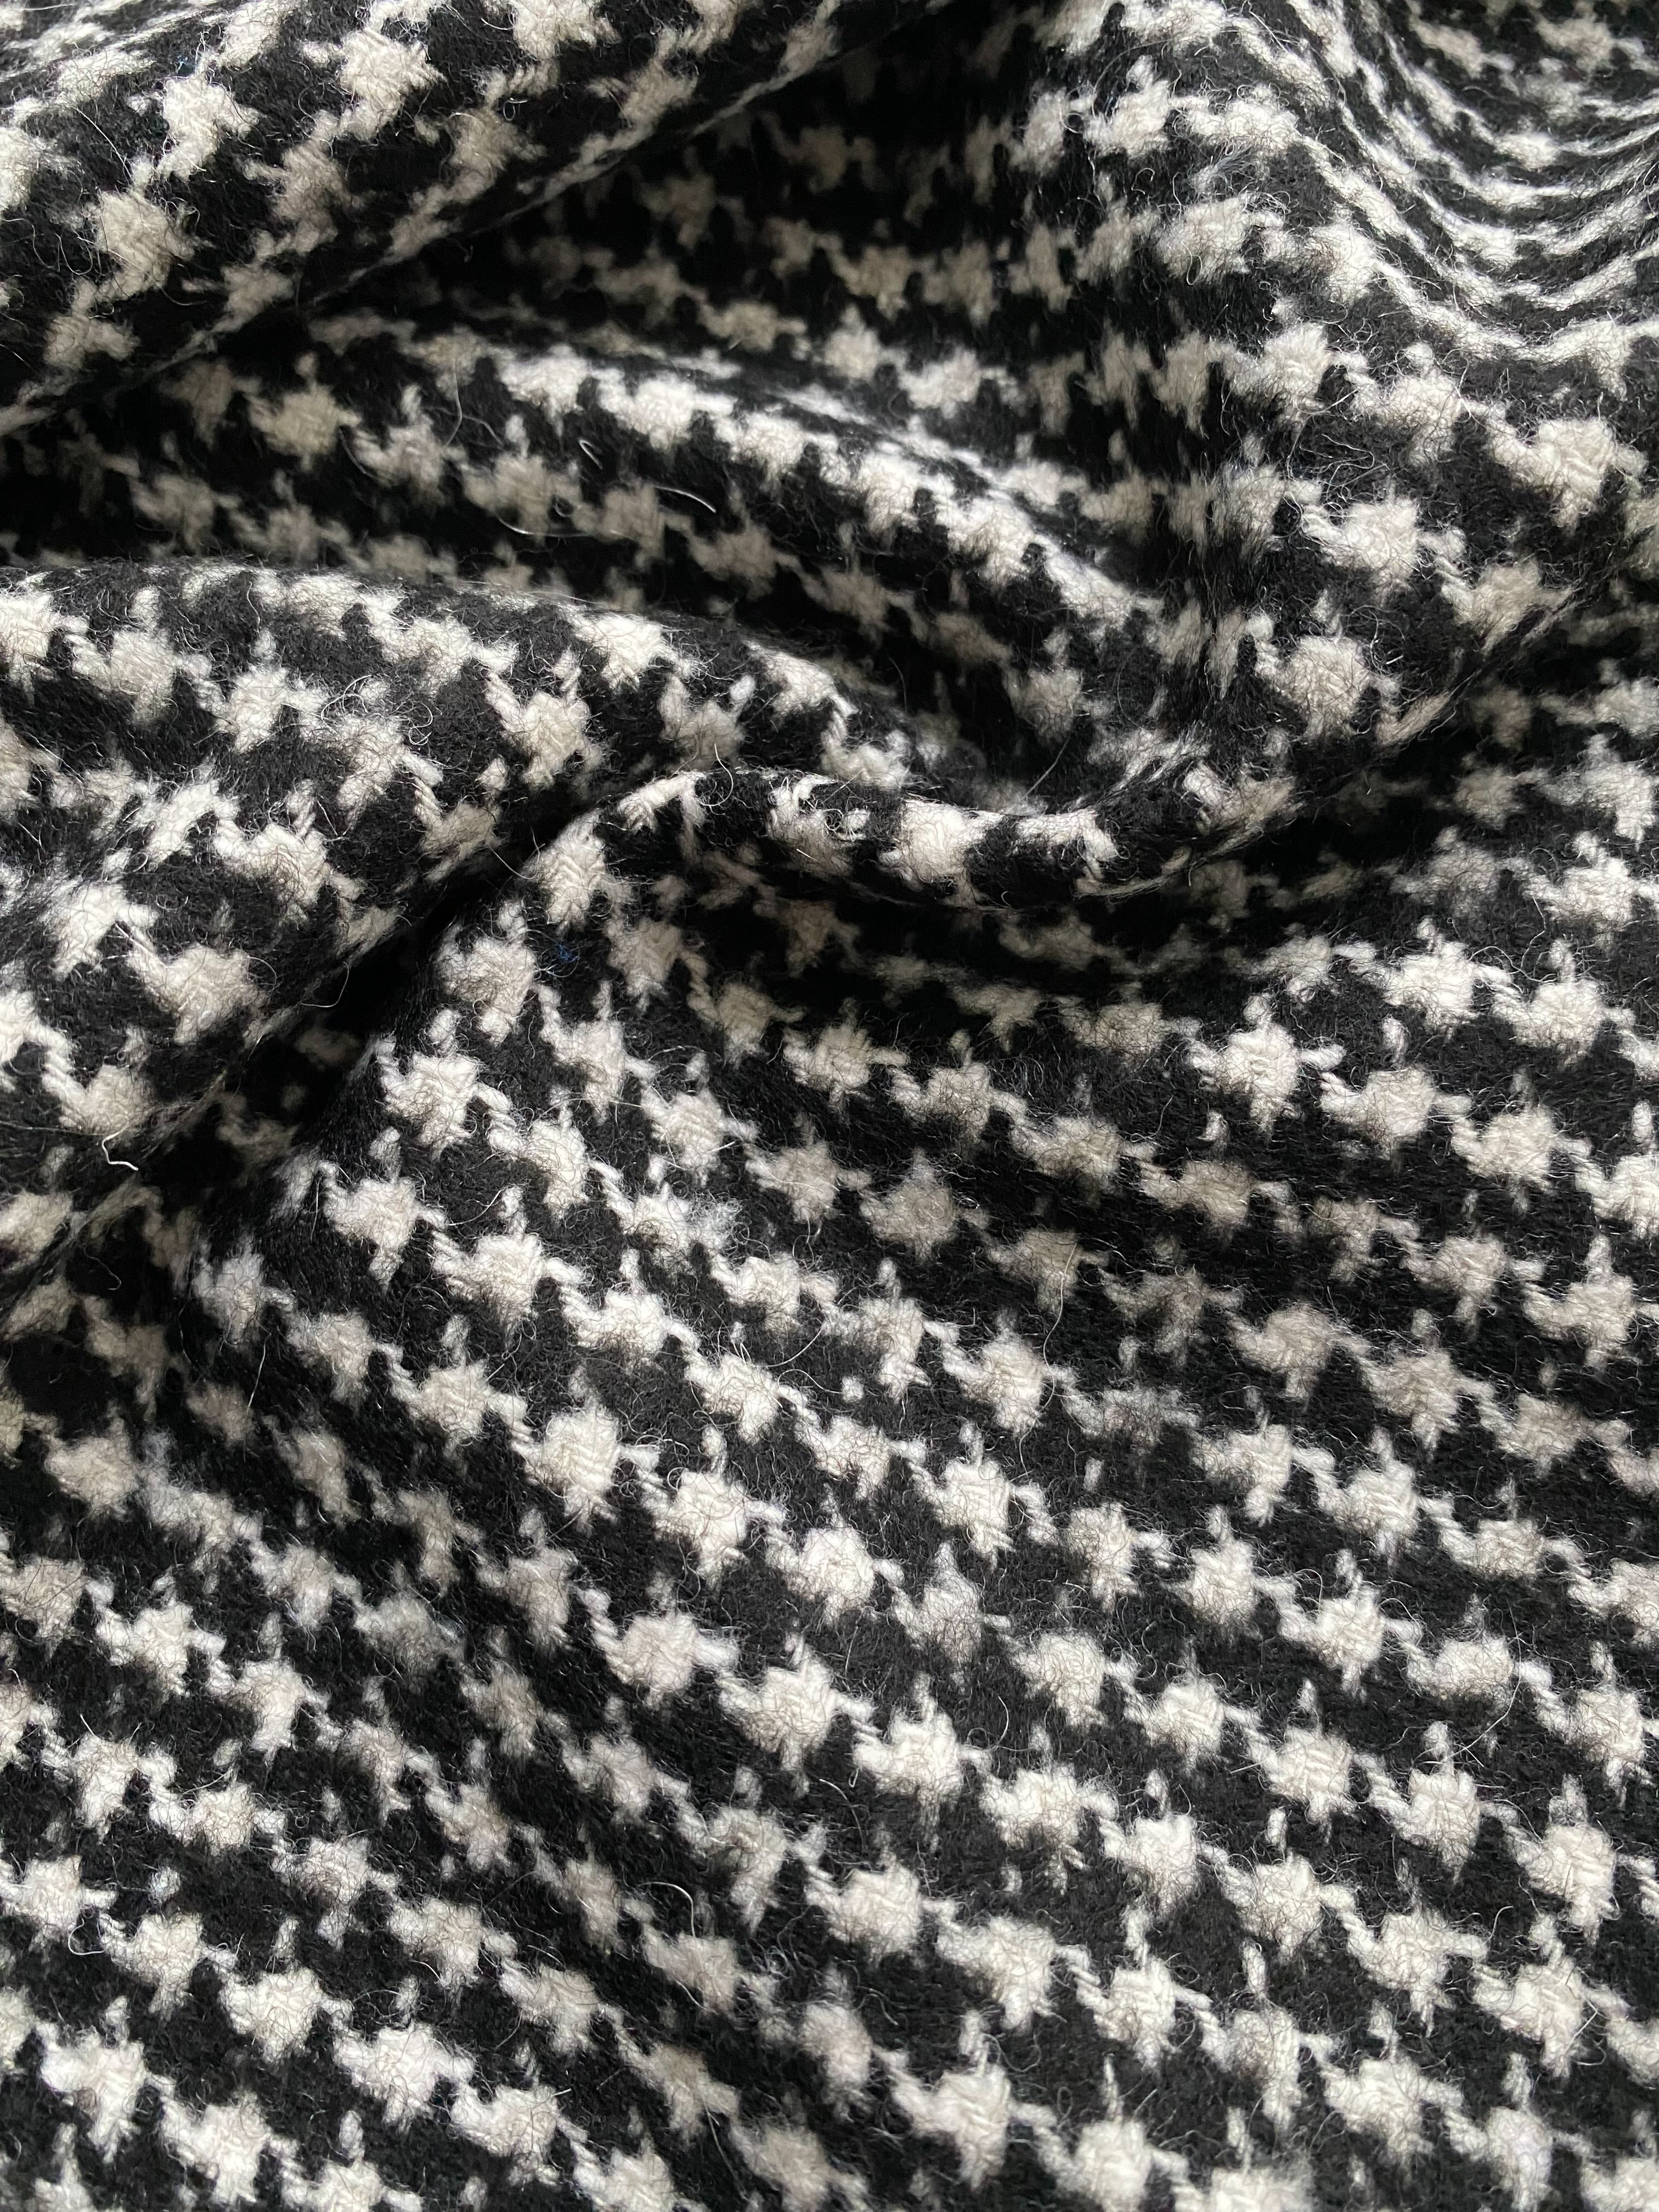 No. 1070 coat fabric with houndstooth pattern